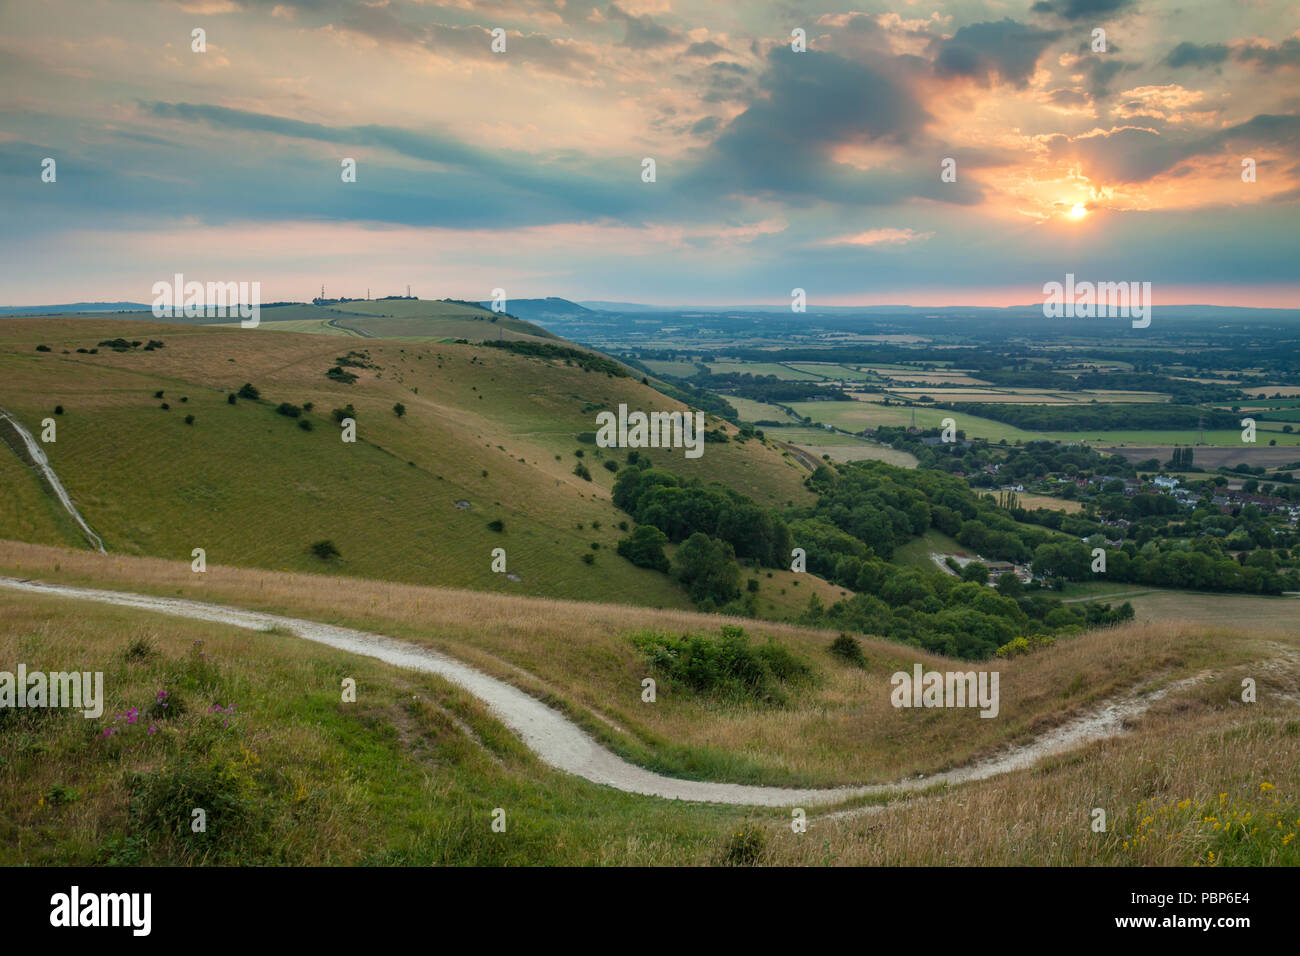 Sommer Sonnenuntergang am Devil's Dyke, South Downs National Park in West Sussex, England. Stockfoto